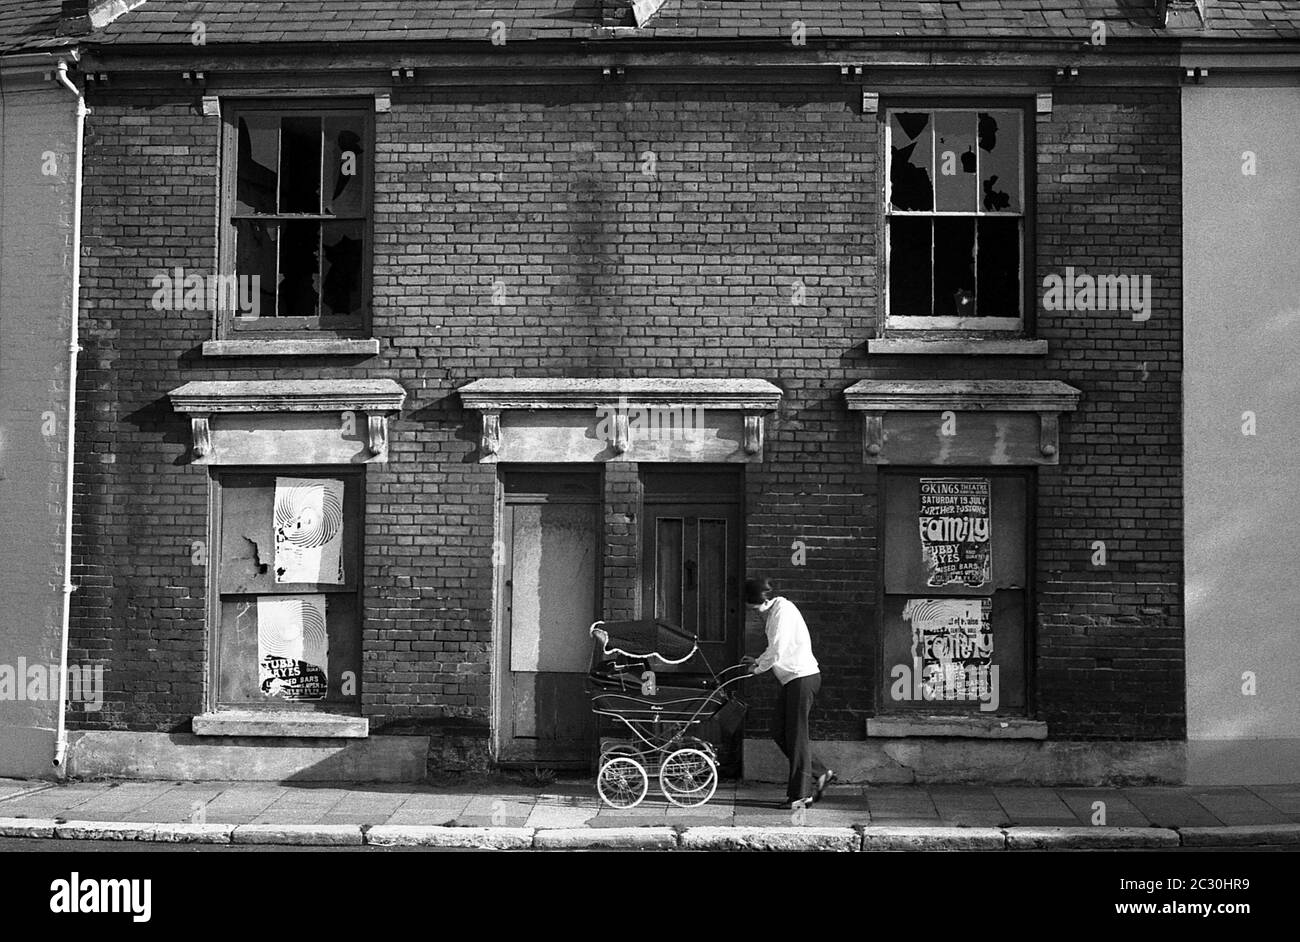 AJAXNETPHOTO. 21ST SEPTEMBER, 1969. SOUTHSEA, PORTSMOUTH, ENGLAND. - TWO UP TWO DOWN - BOARDED UP VICTORIAN TERRACED HOUSING NEAR MARMION ROAD AWAITS DEMOLITION.PHOTO:JONATHAN EASTLAND/AJAX REF:356948 20 22A Stock Photo